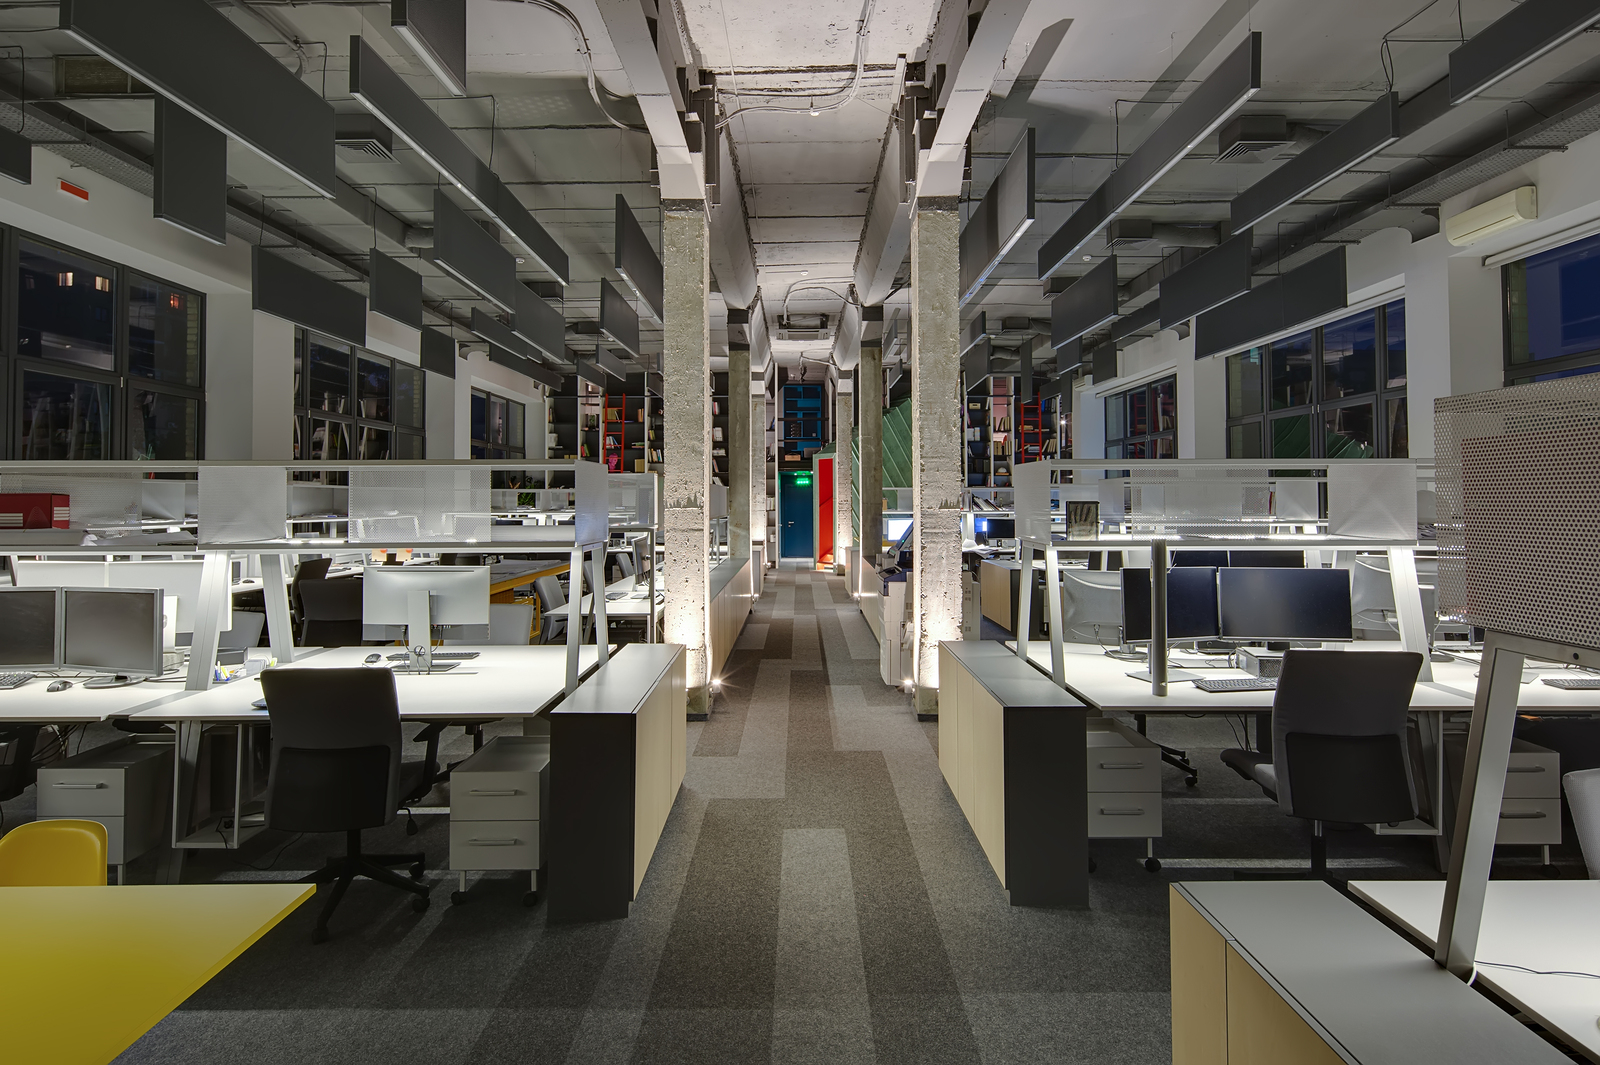 Glowing office in a loft style with grey carpet tiles.